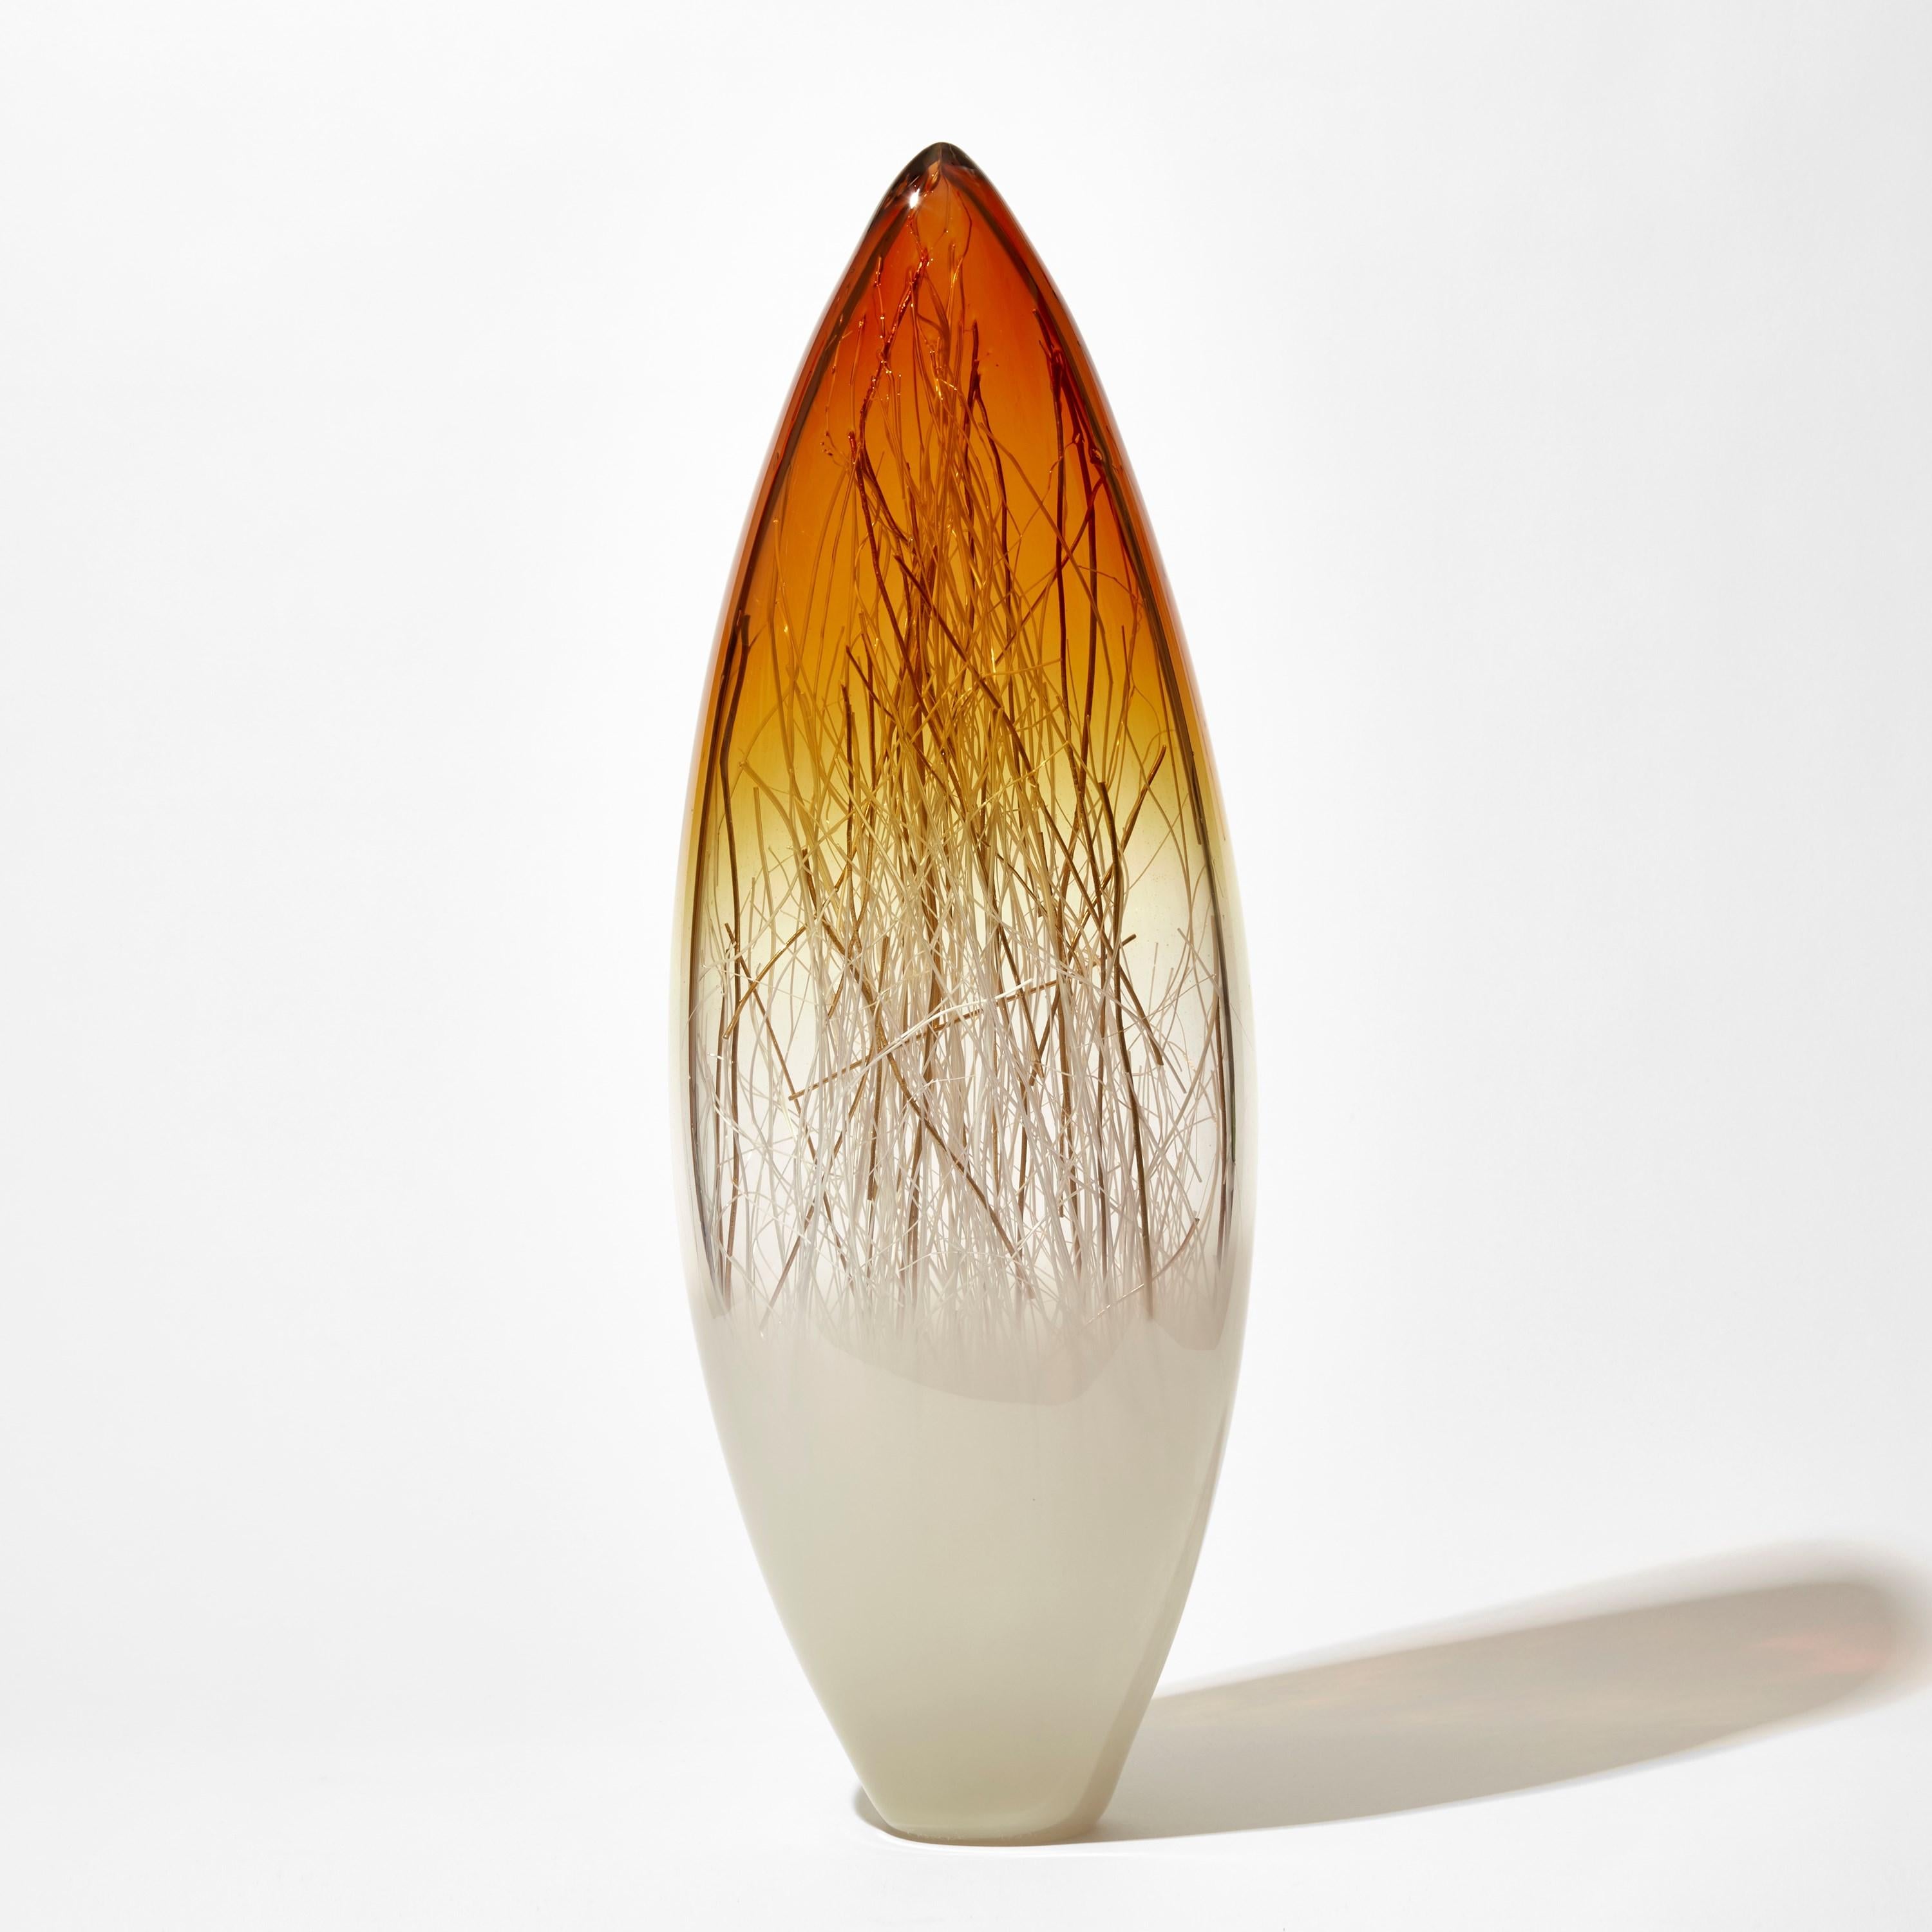 'Ore in Amber & Ecru with Gold' is a unique handblown and sculpted glass artwork by the Danish and British artists, Hanne Enemark & Louis Thompson.

The outer glass form contains a multitude of fine white canes of glass, some of which have been